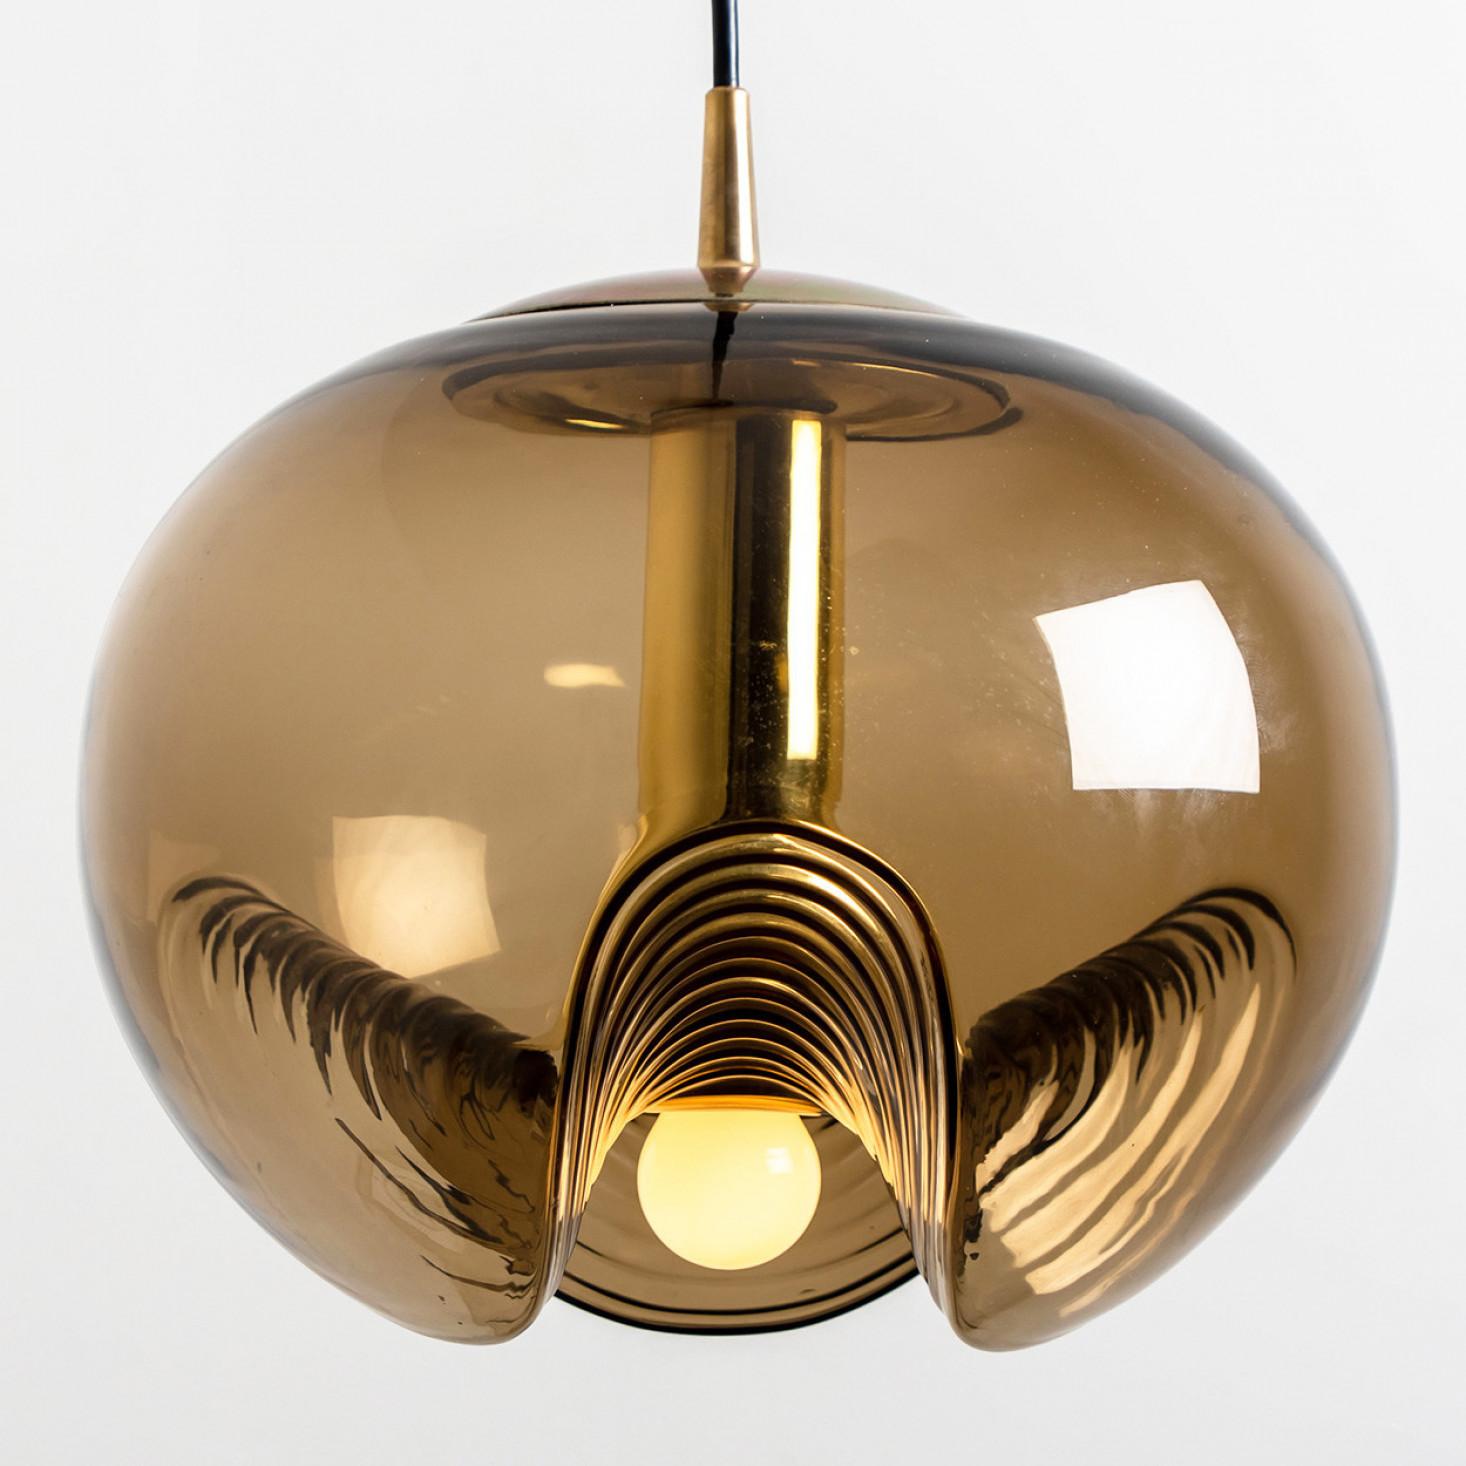 A special set of round biomorphic smoked glass light fixtures designed by Koch & Lowy for Peill & Putzler, manufactured in Germany, circa 1970s. These Peill & Putzler vintage light fixtures become quickly design classics.

The blown glass has a